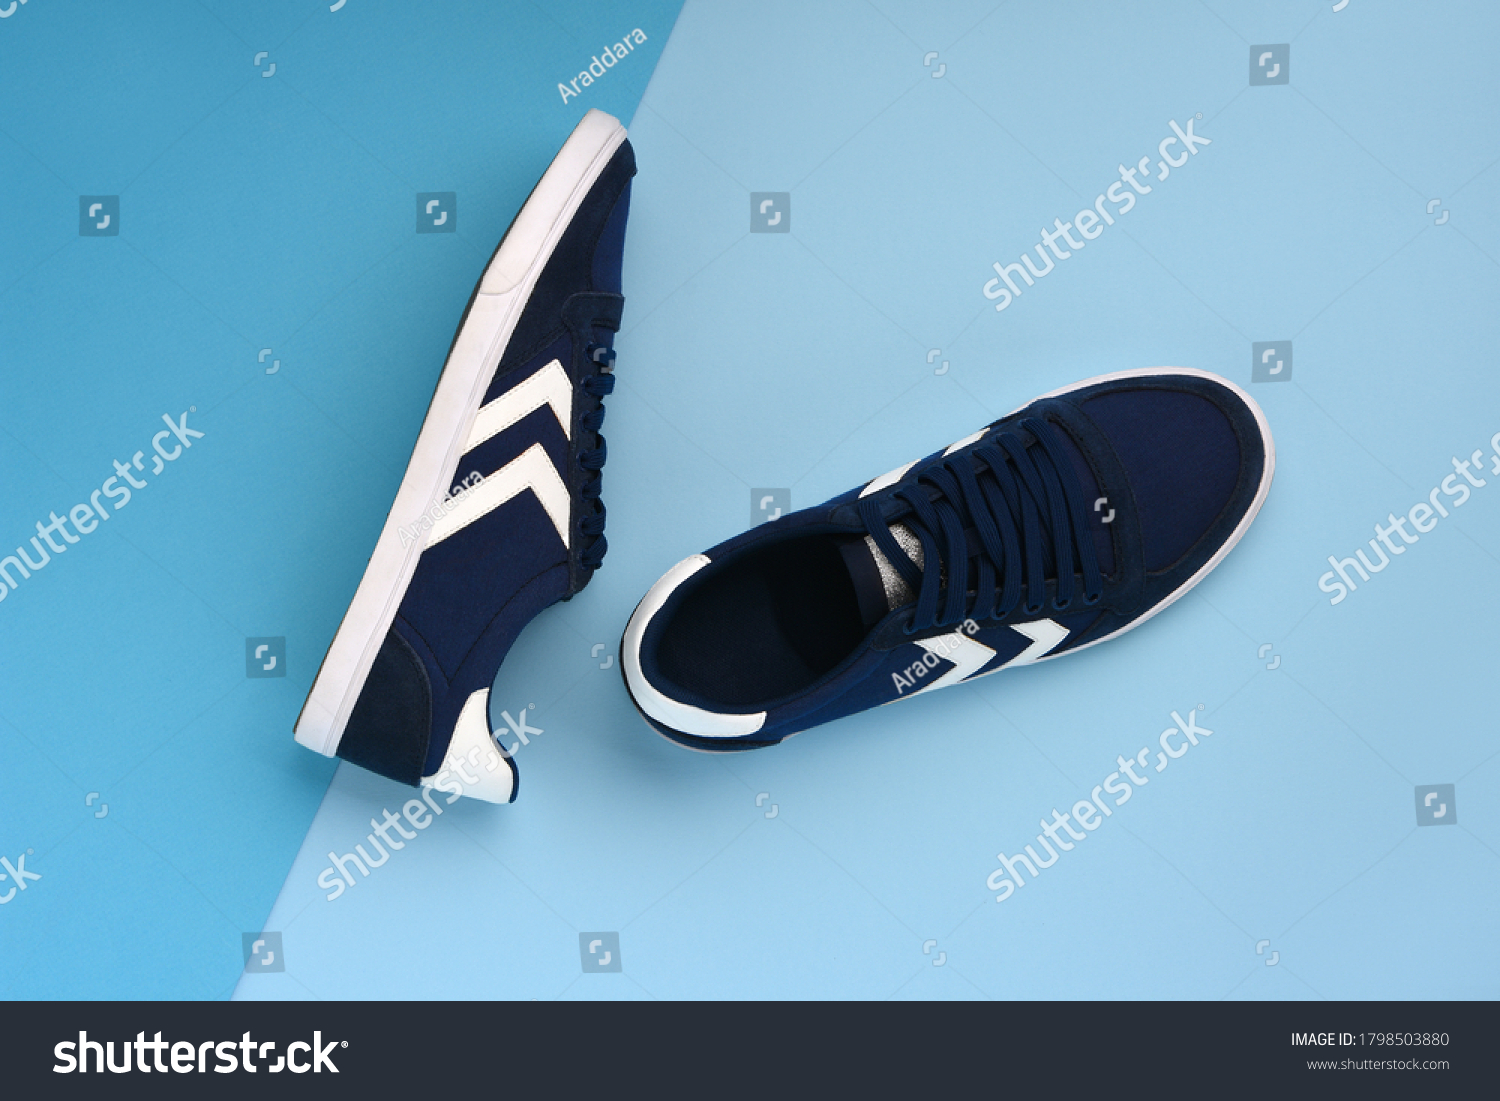 A pair of navy blue sneakers lying on a dark and light blue background. Minimal photo #1798503880